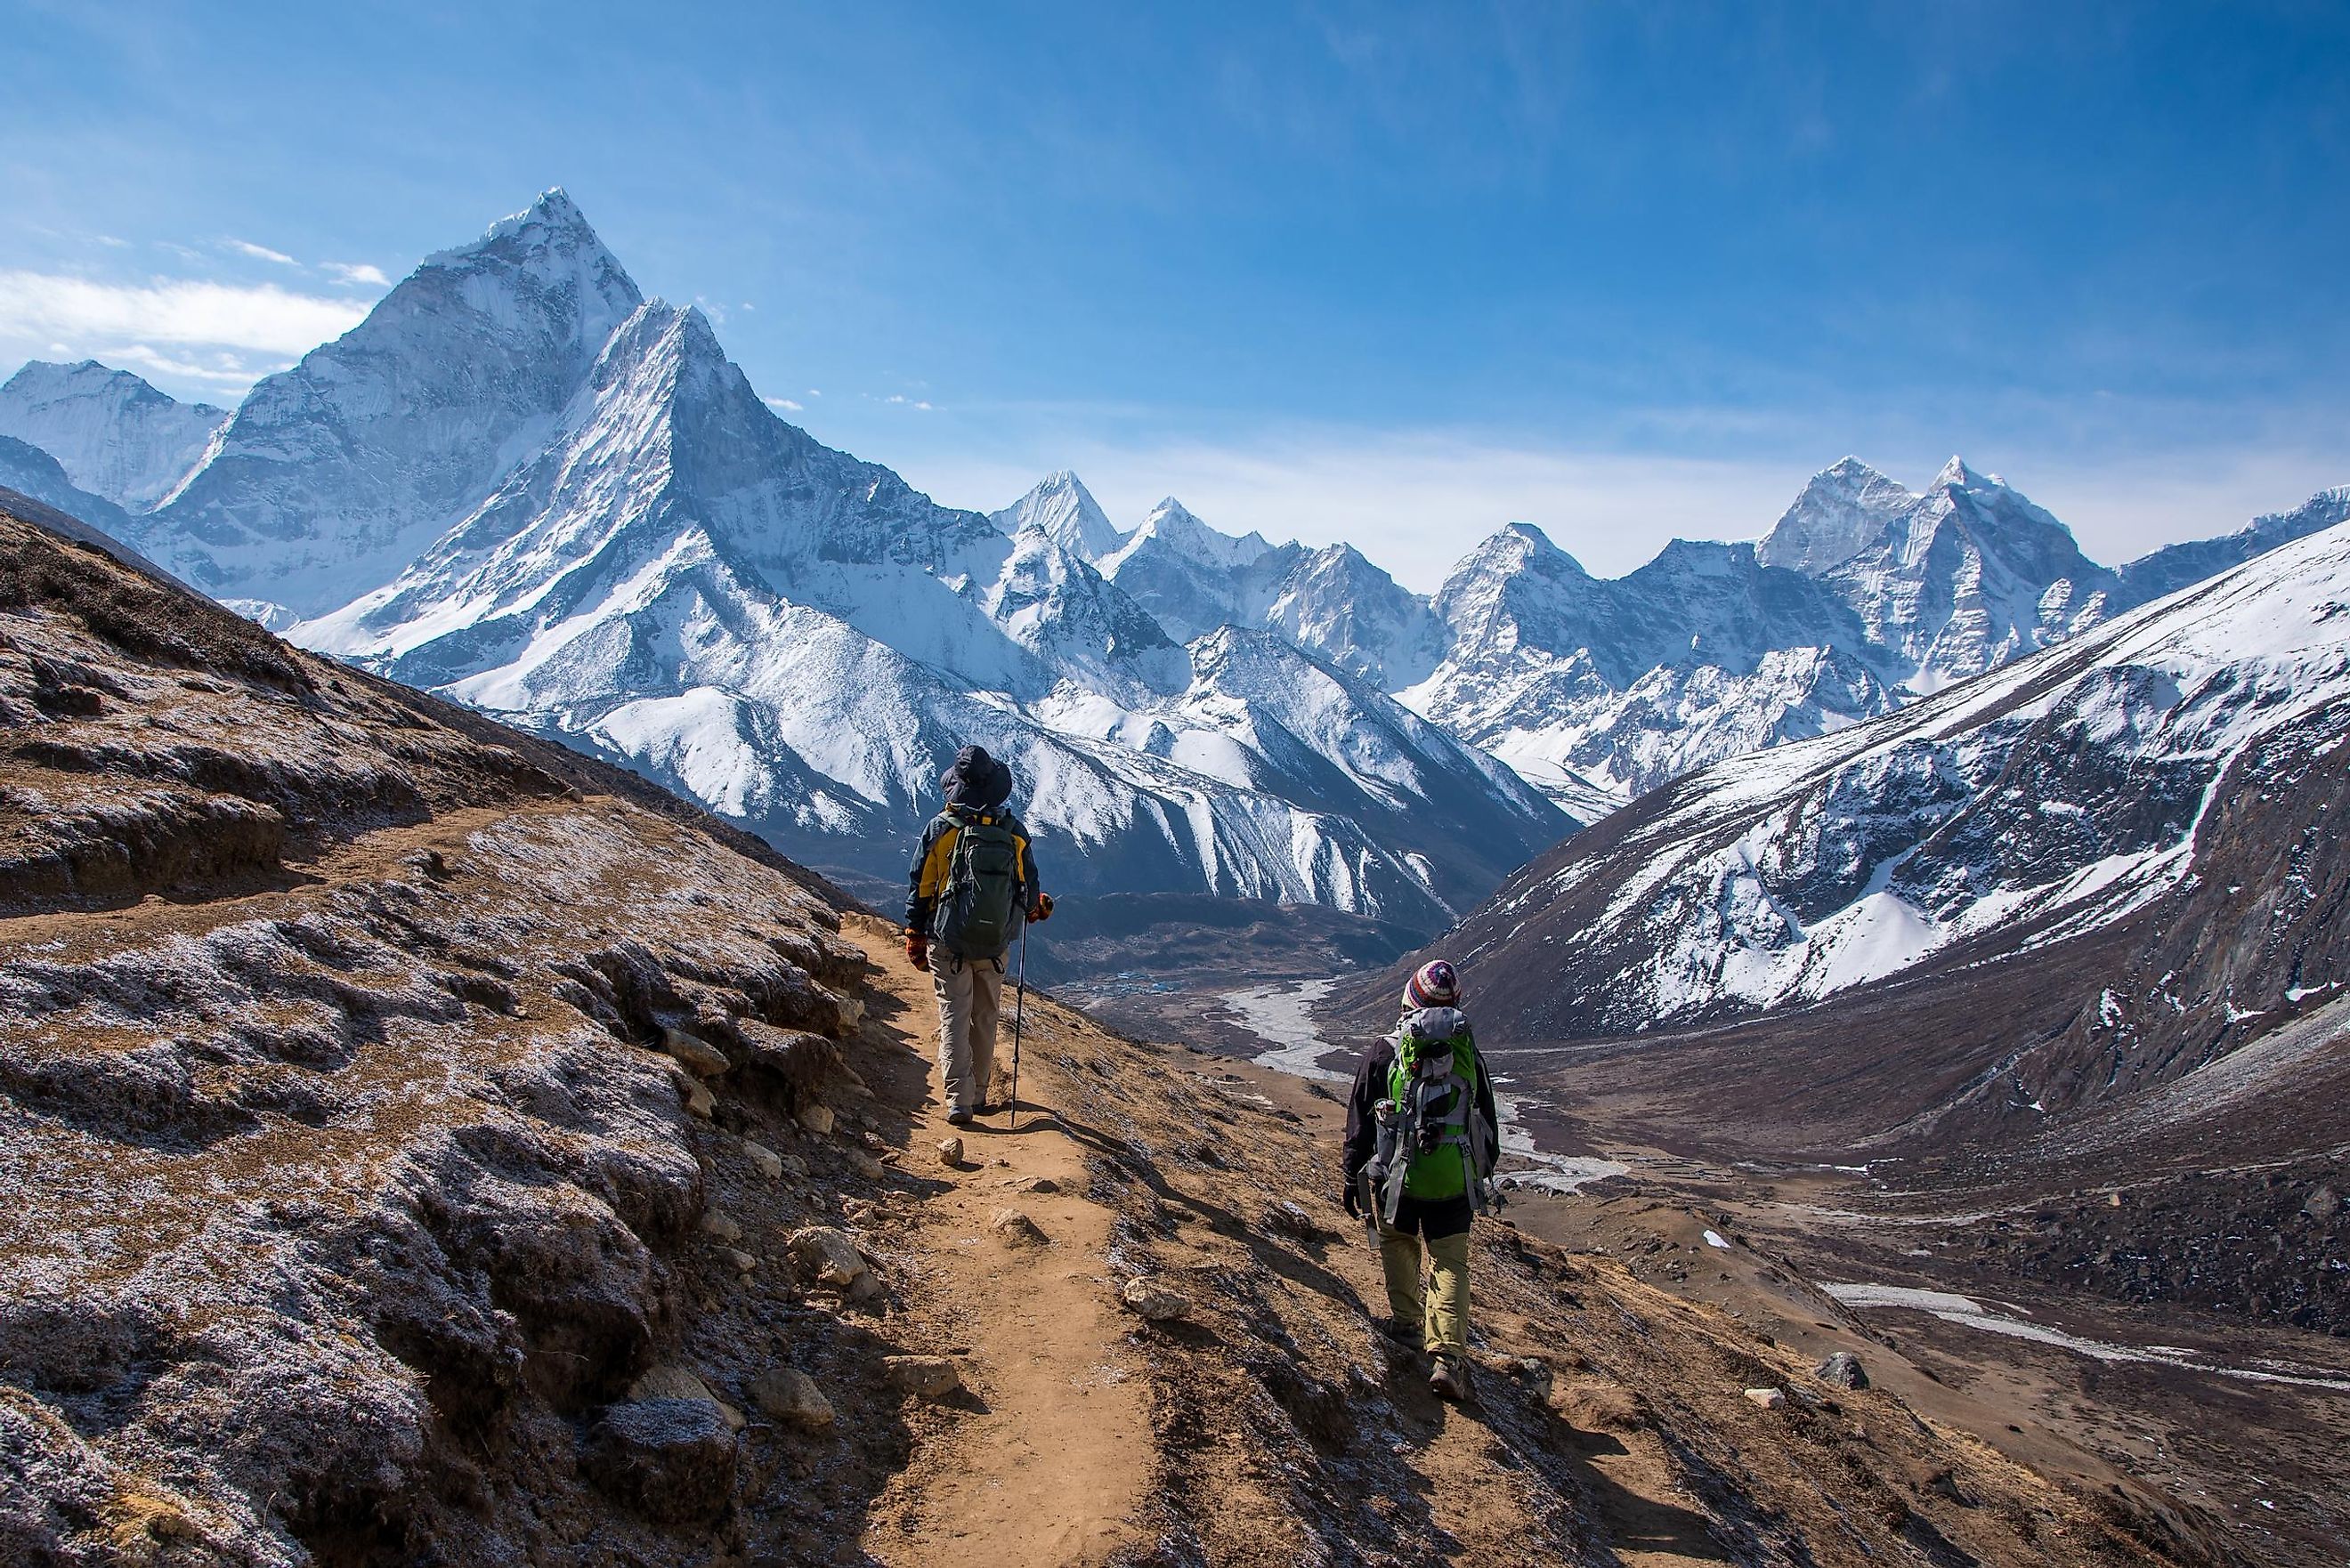 Hikers on their way to the Everest Base Camp in Nepal.